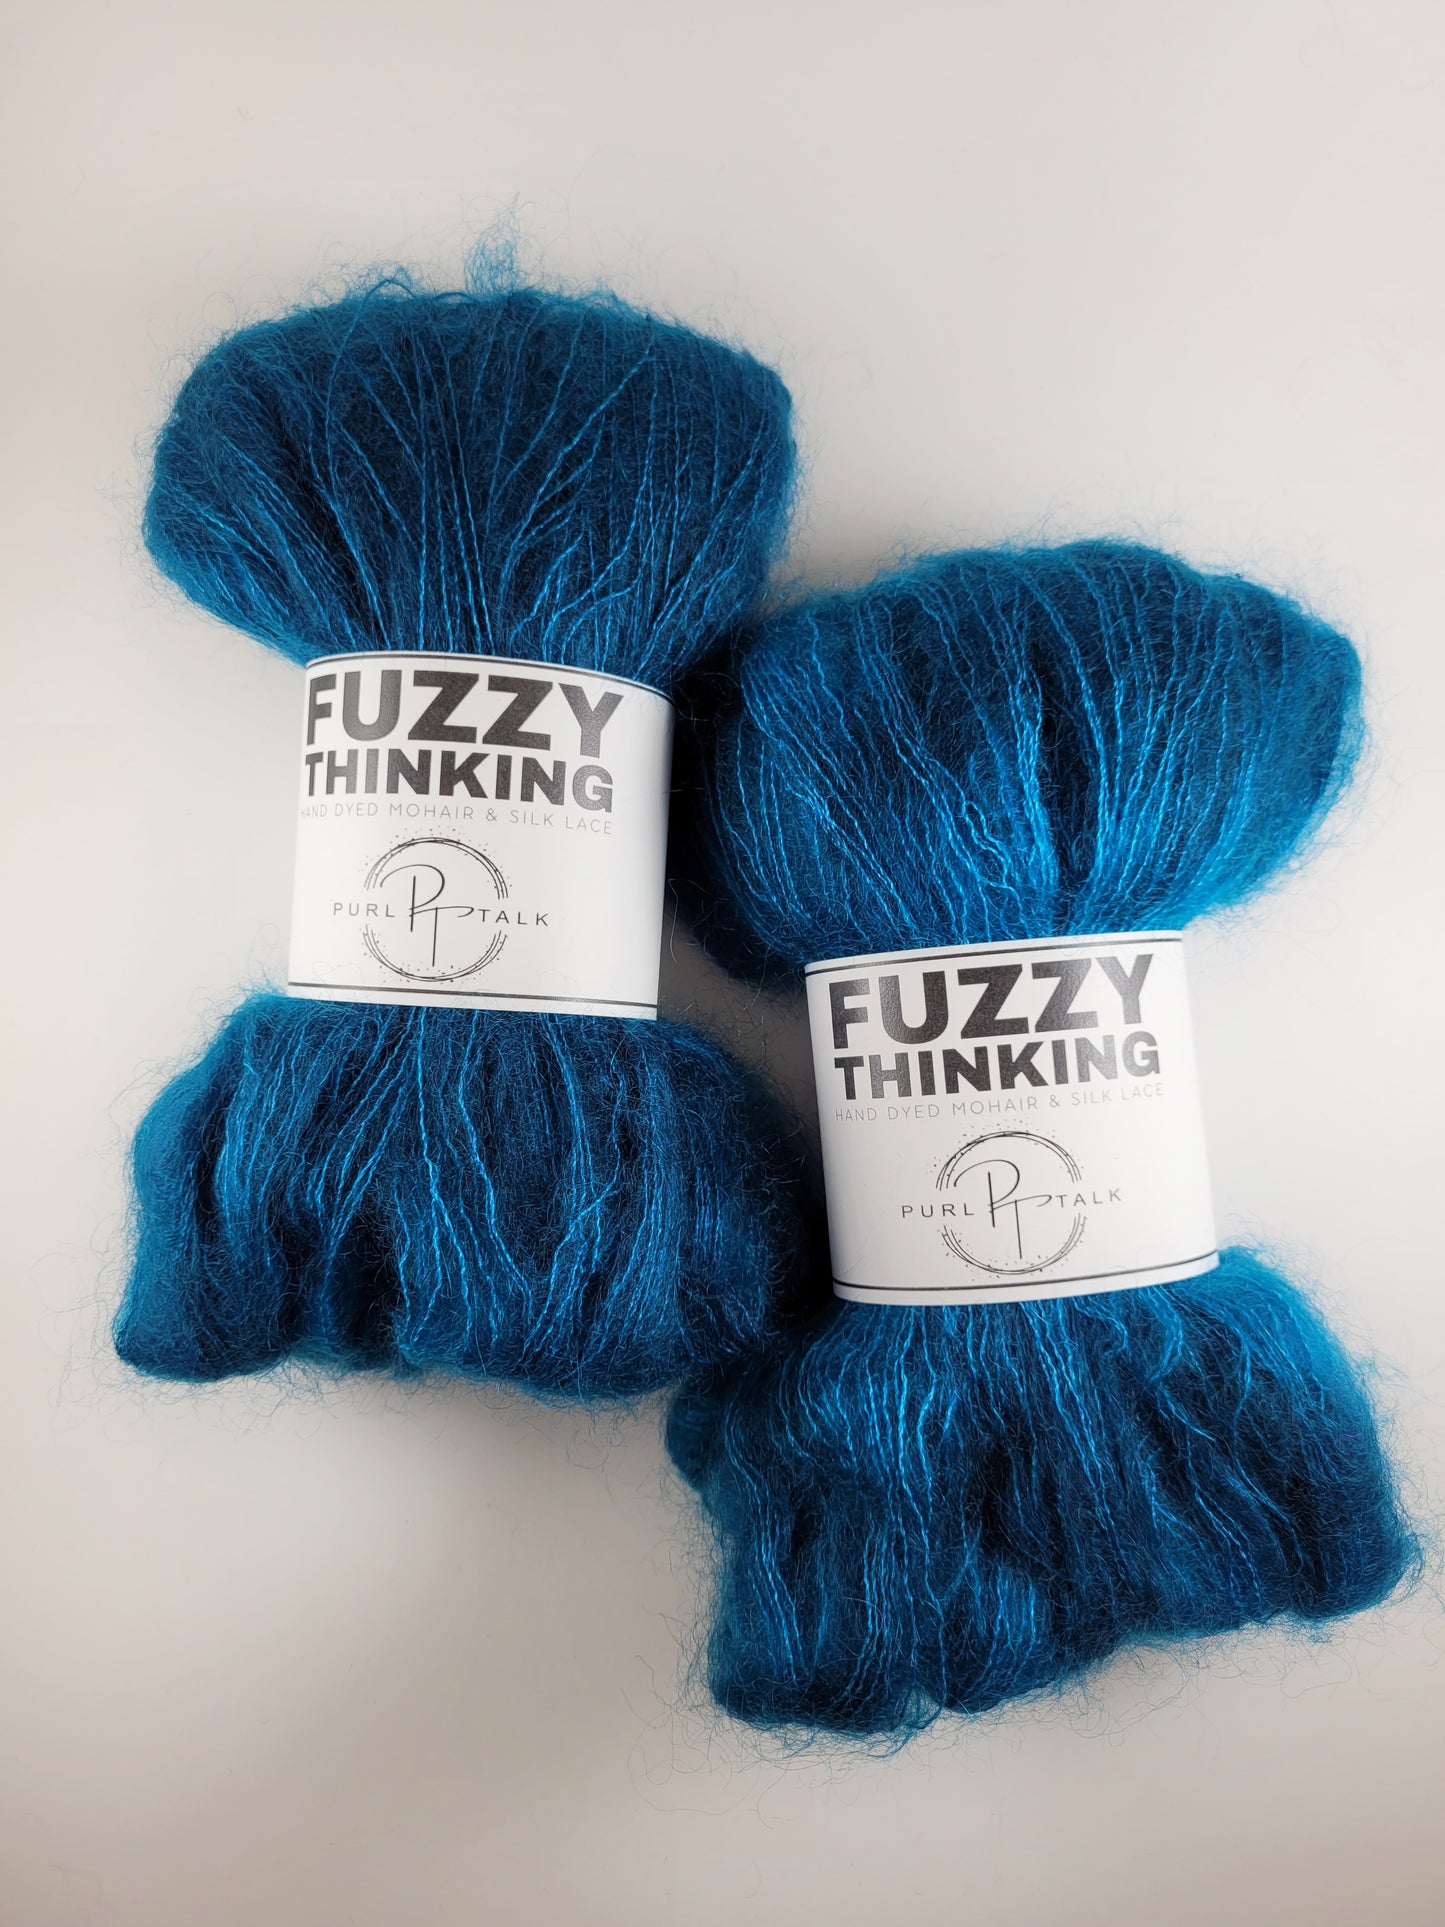 Fuzzy Thinking, Color: Turquoise + Black